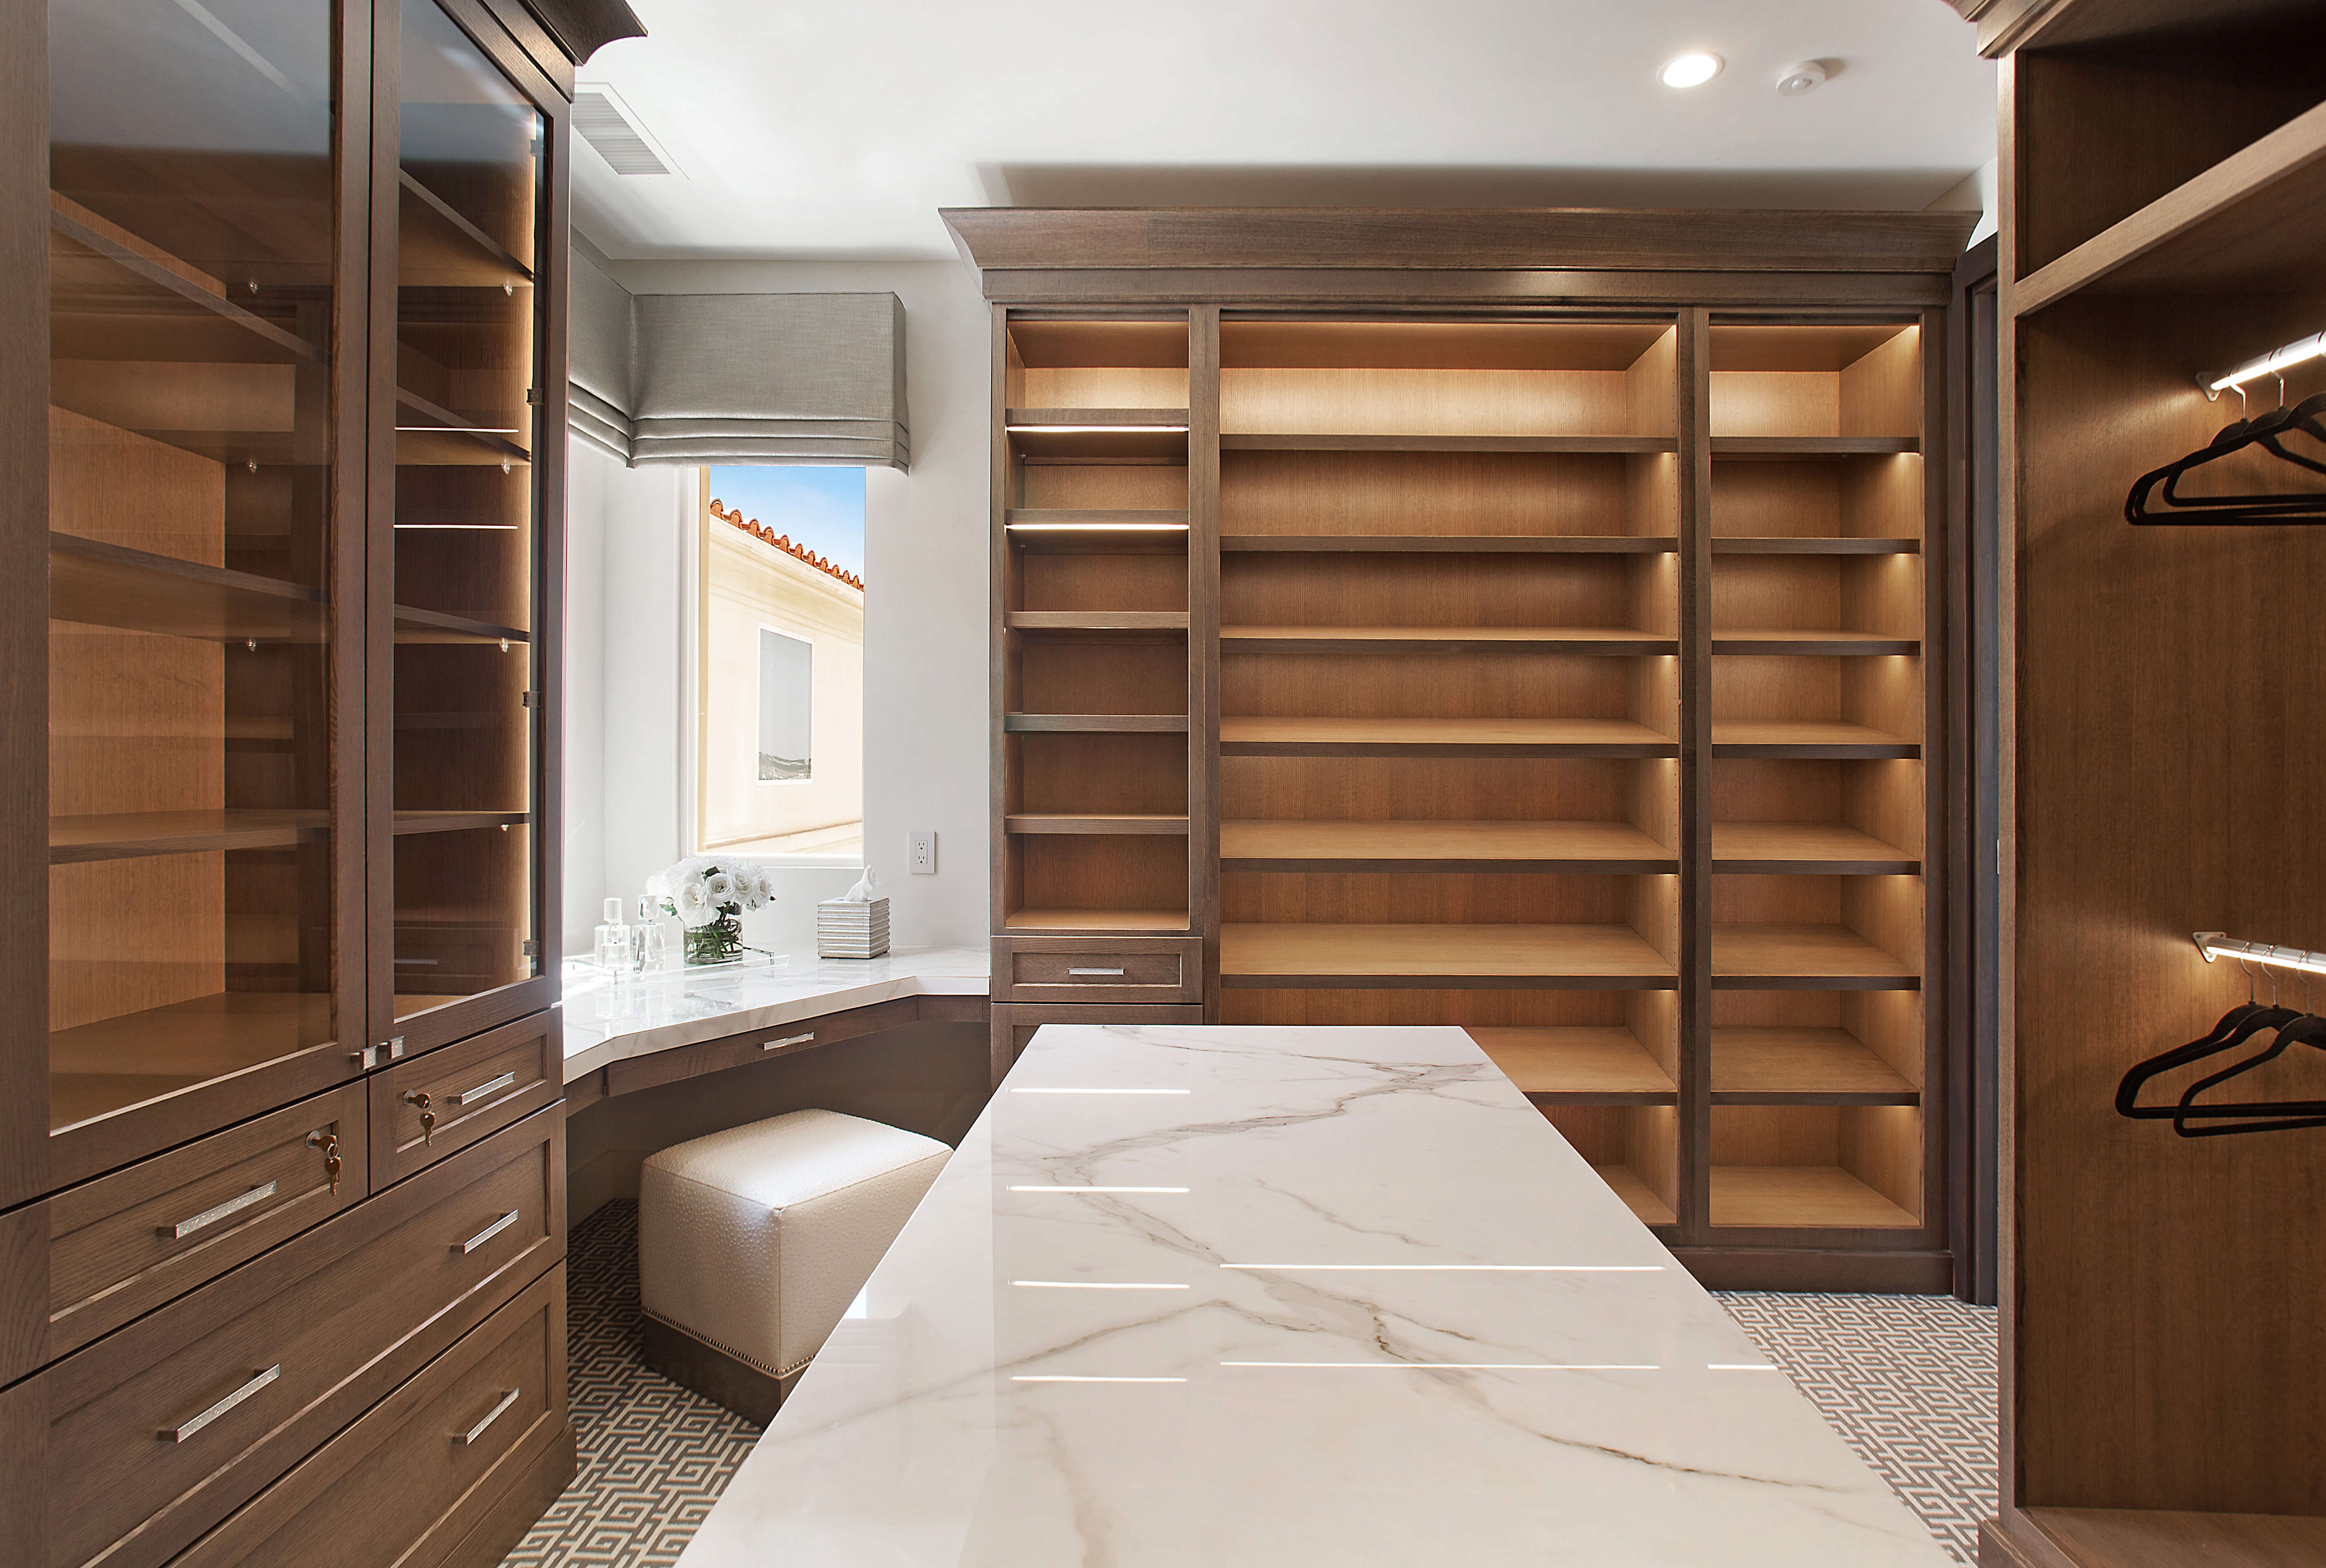 A beautiful master bedroom closet design with 3 walls of custom storage, a island in the center, and a corner beauty desk with seating.